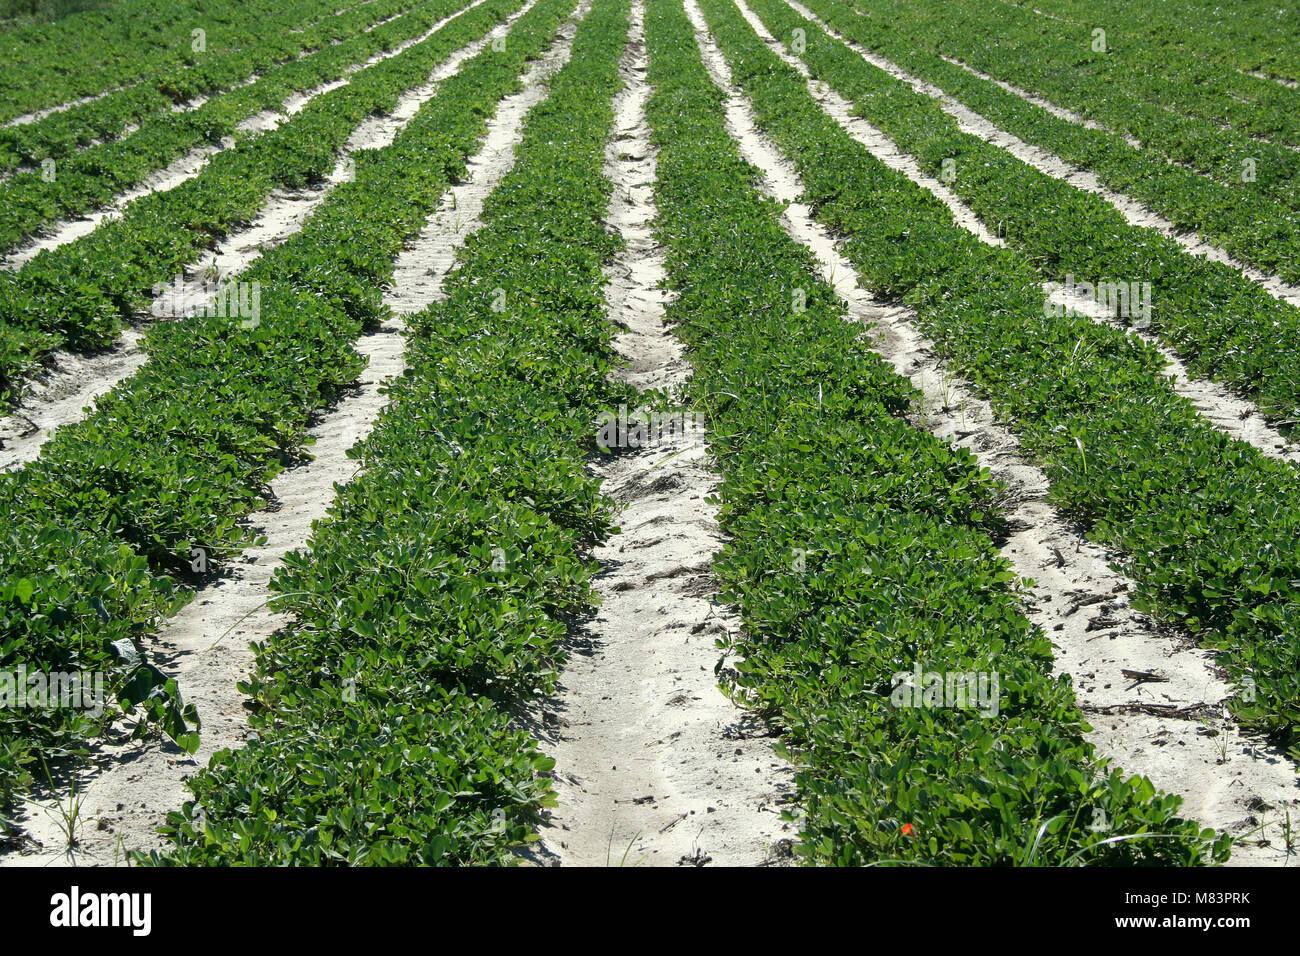 Some Rows of crops in a field Stock Photo